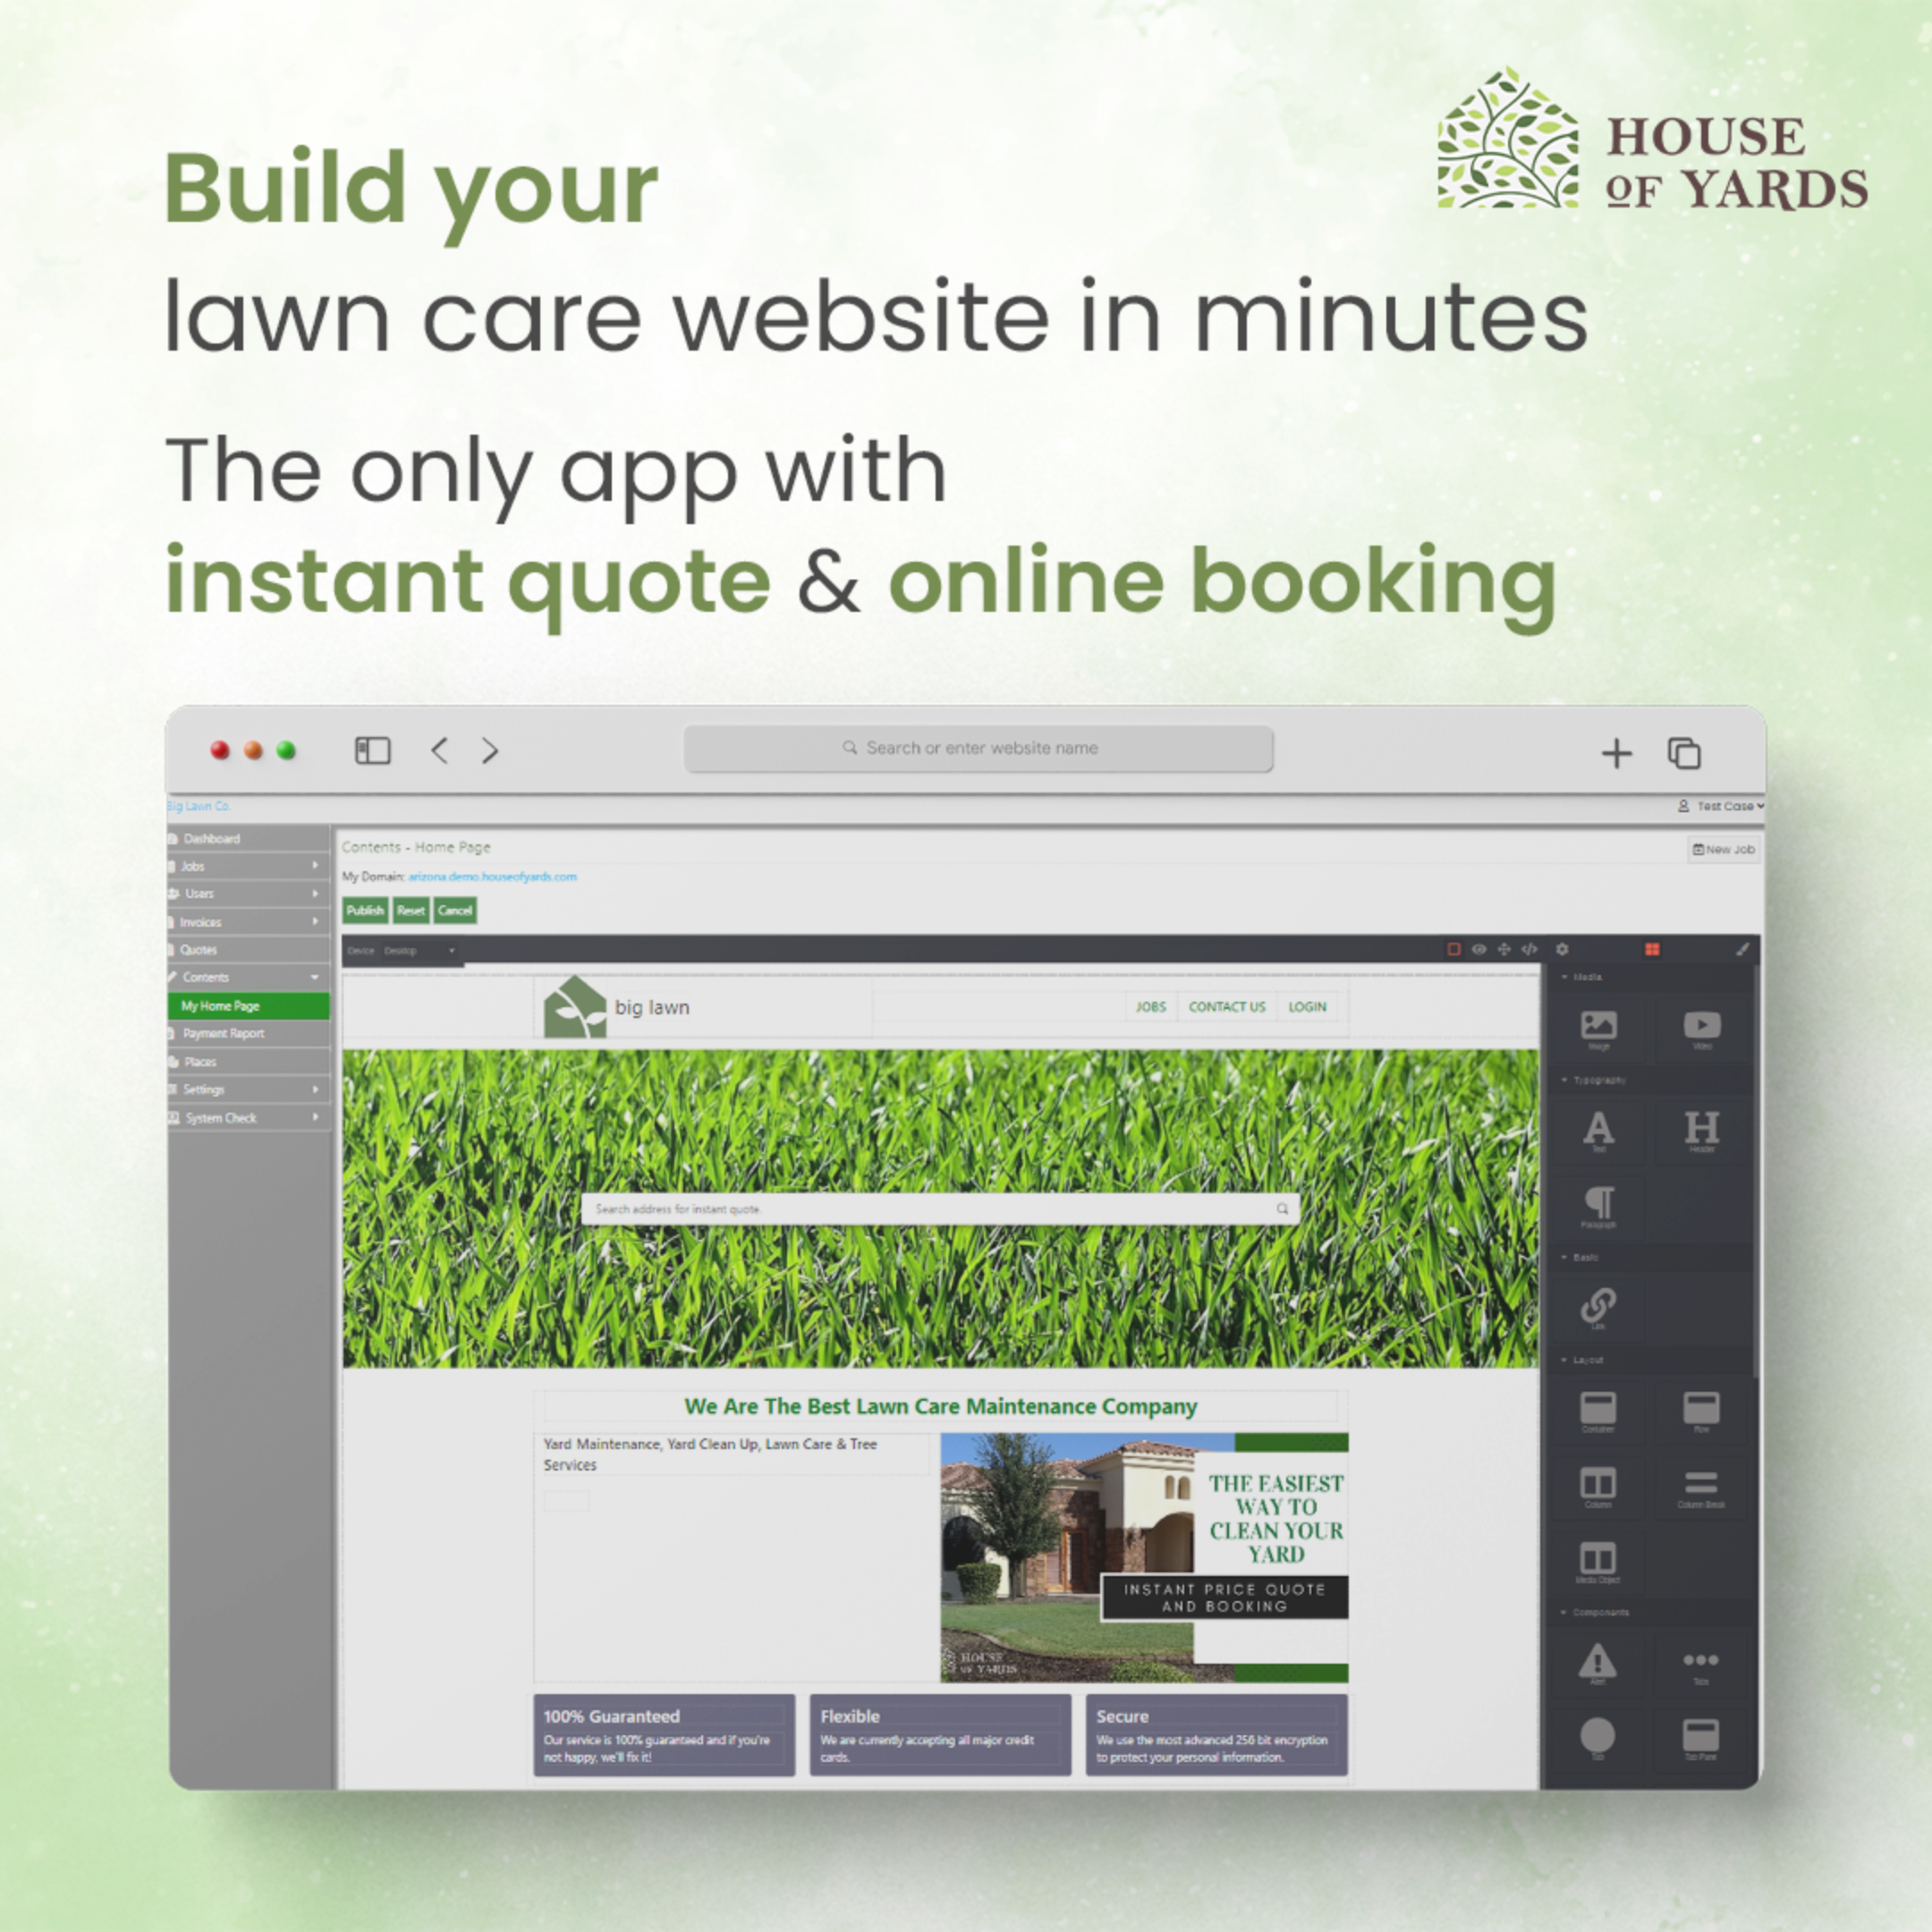 House of Yards Lawn Care Website Built in Mins